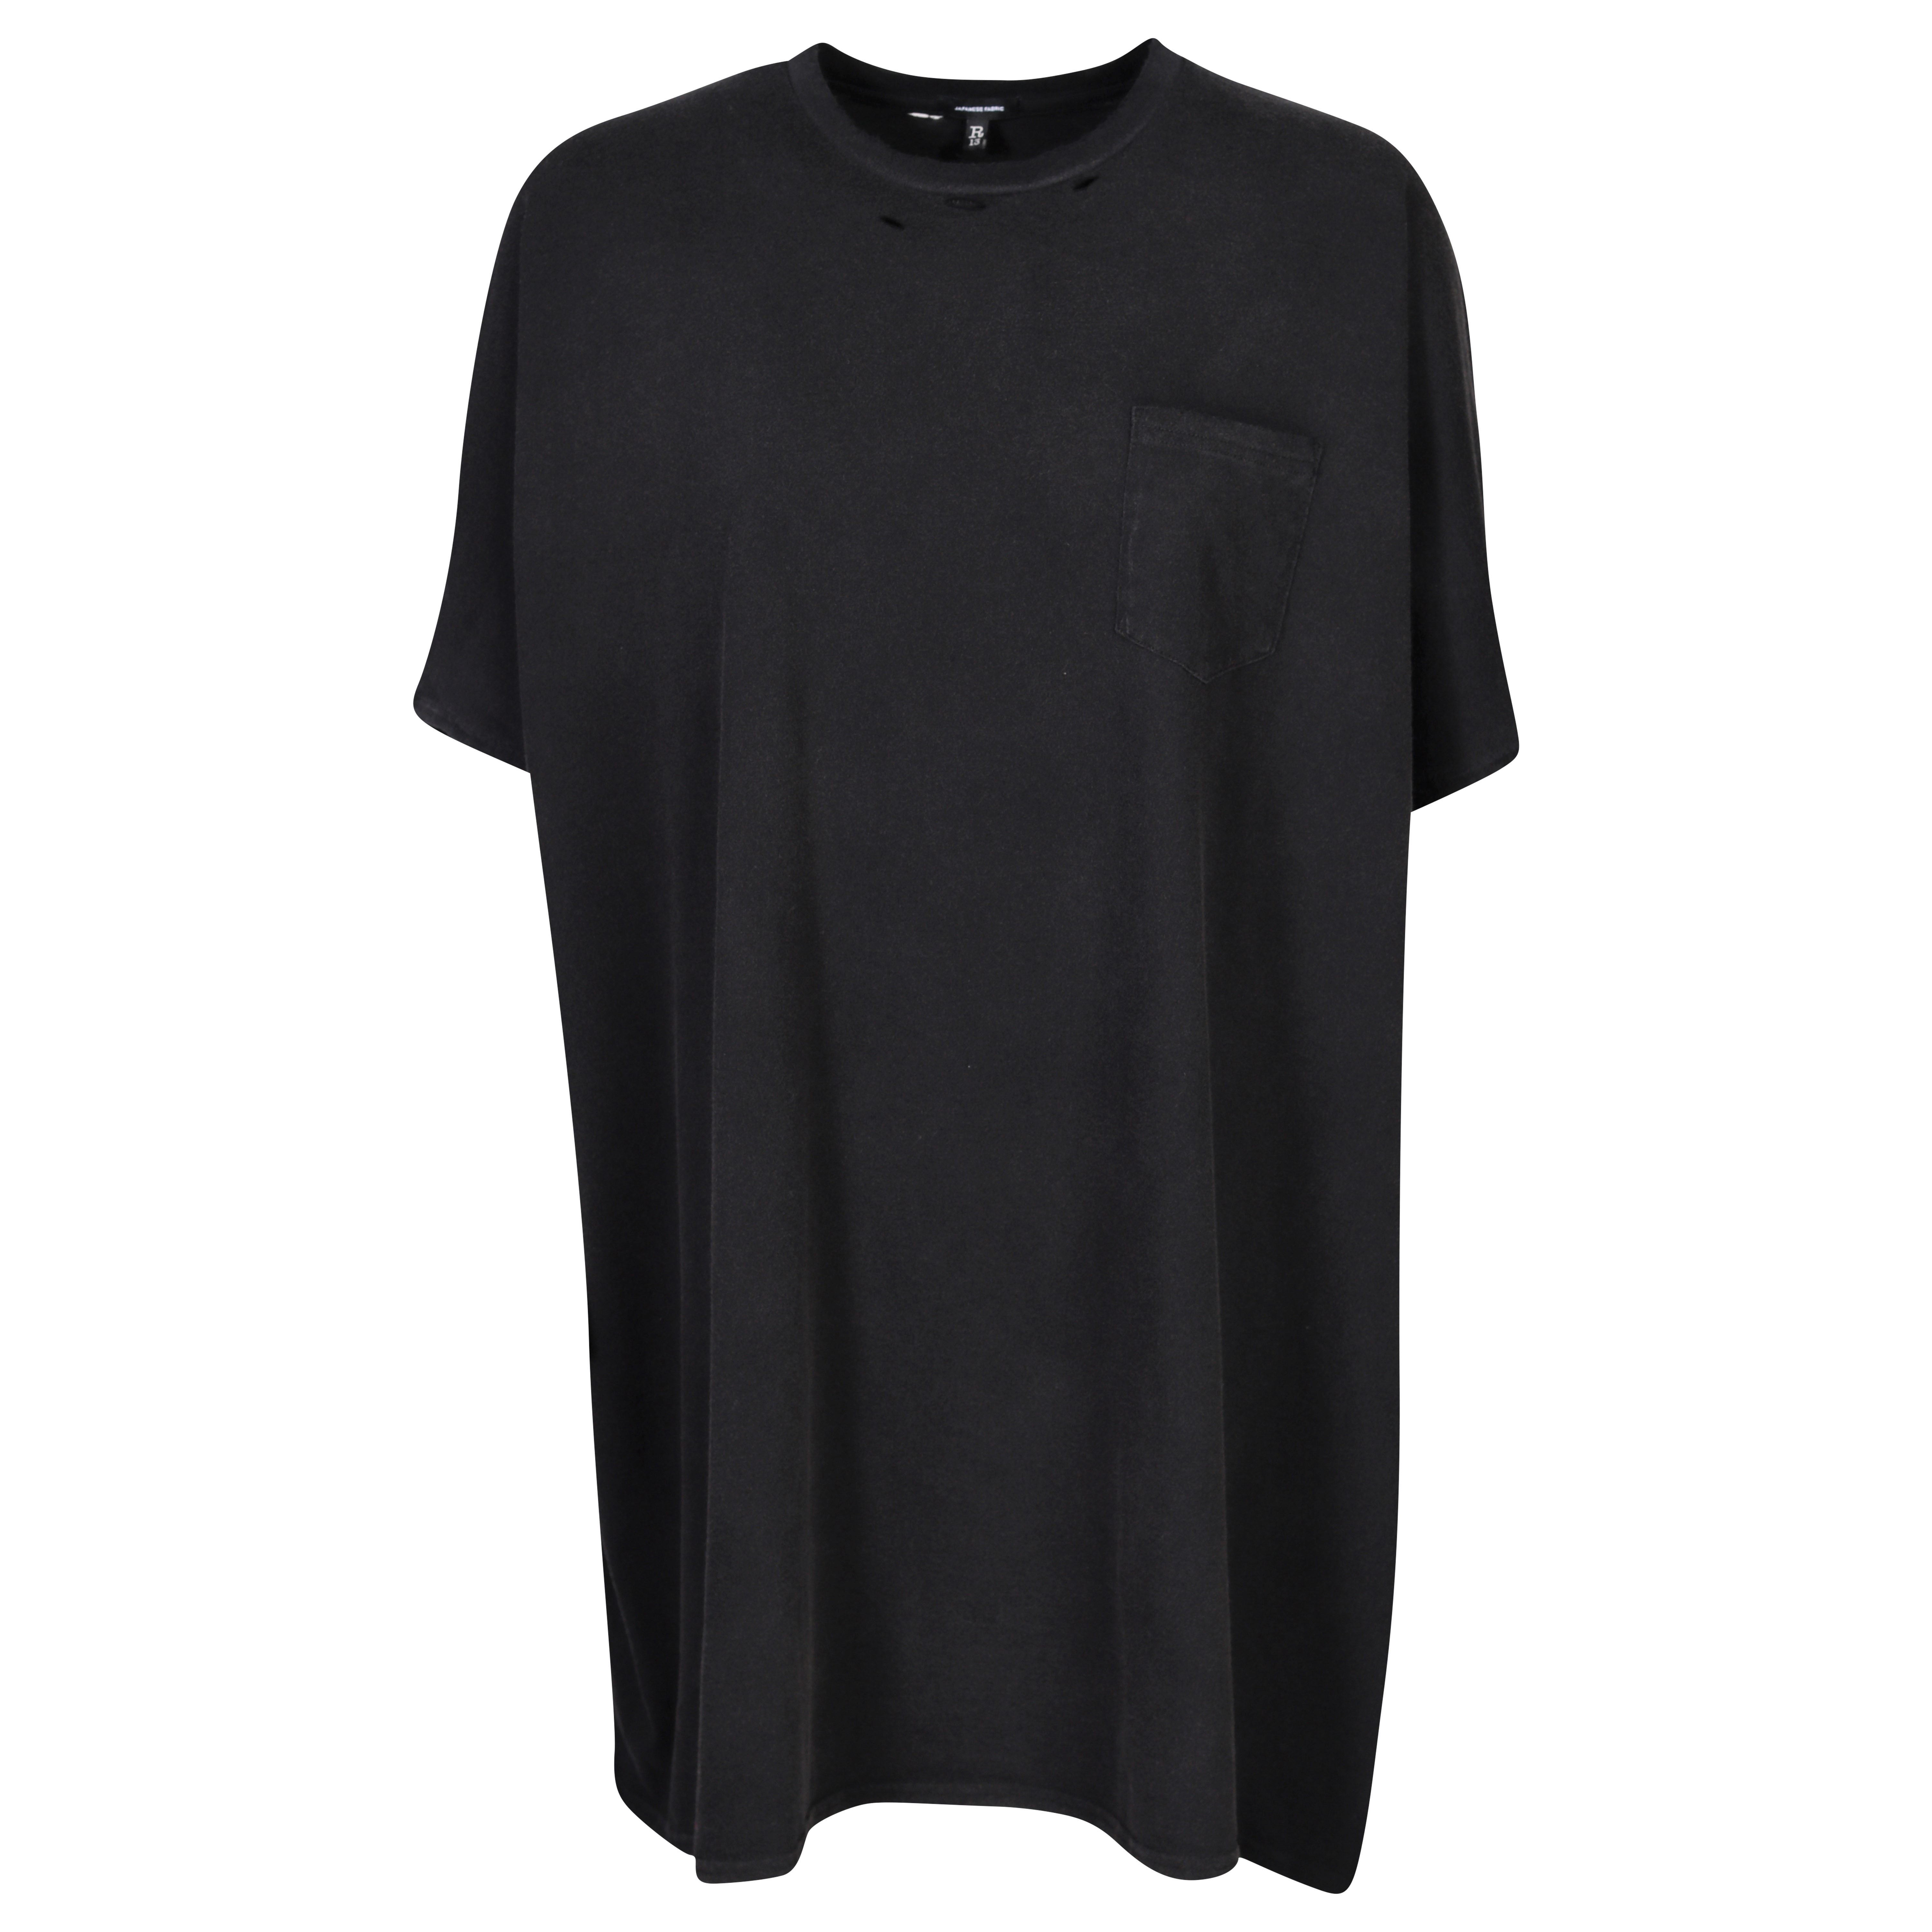 R13 Destroyed Oversize Boxy T-Shirt Dress in Black S